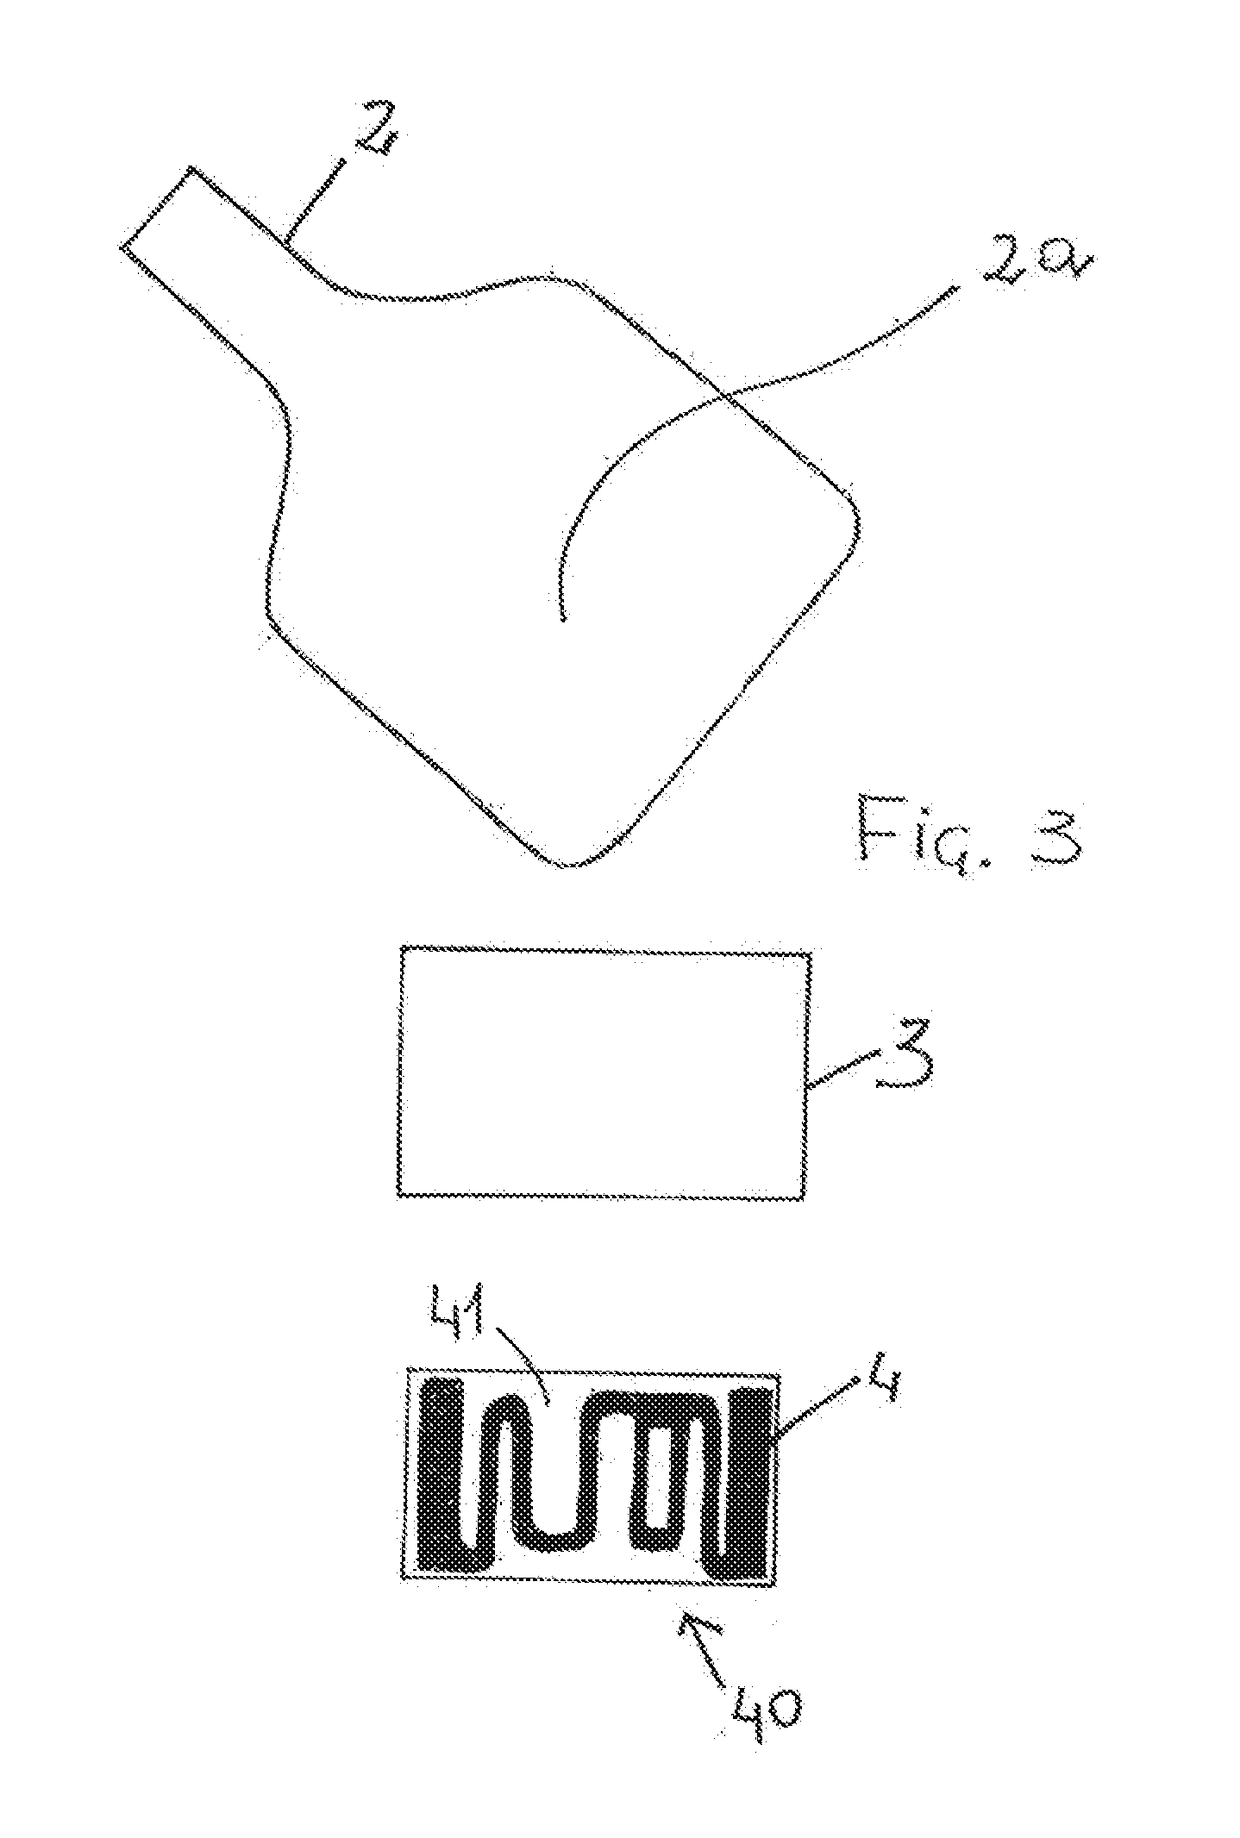 Ear tag for livestock and method for producing an ear tag for livestock